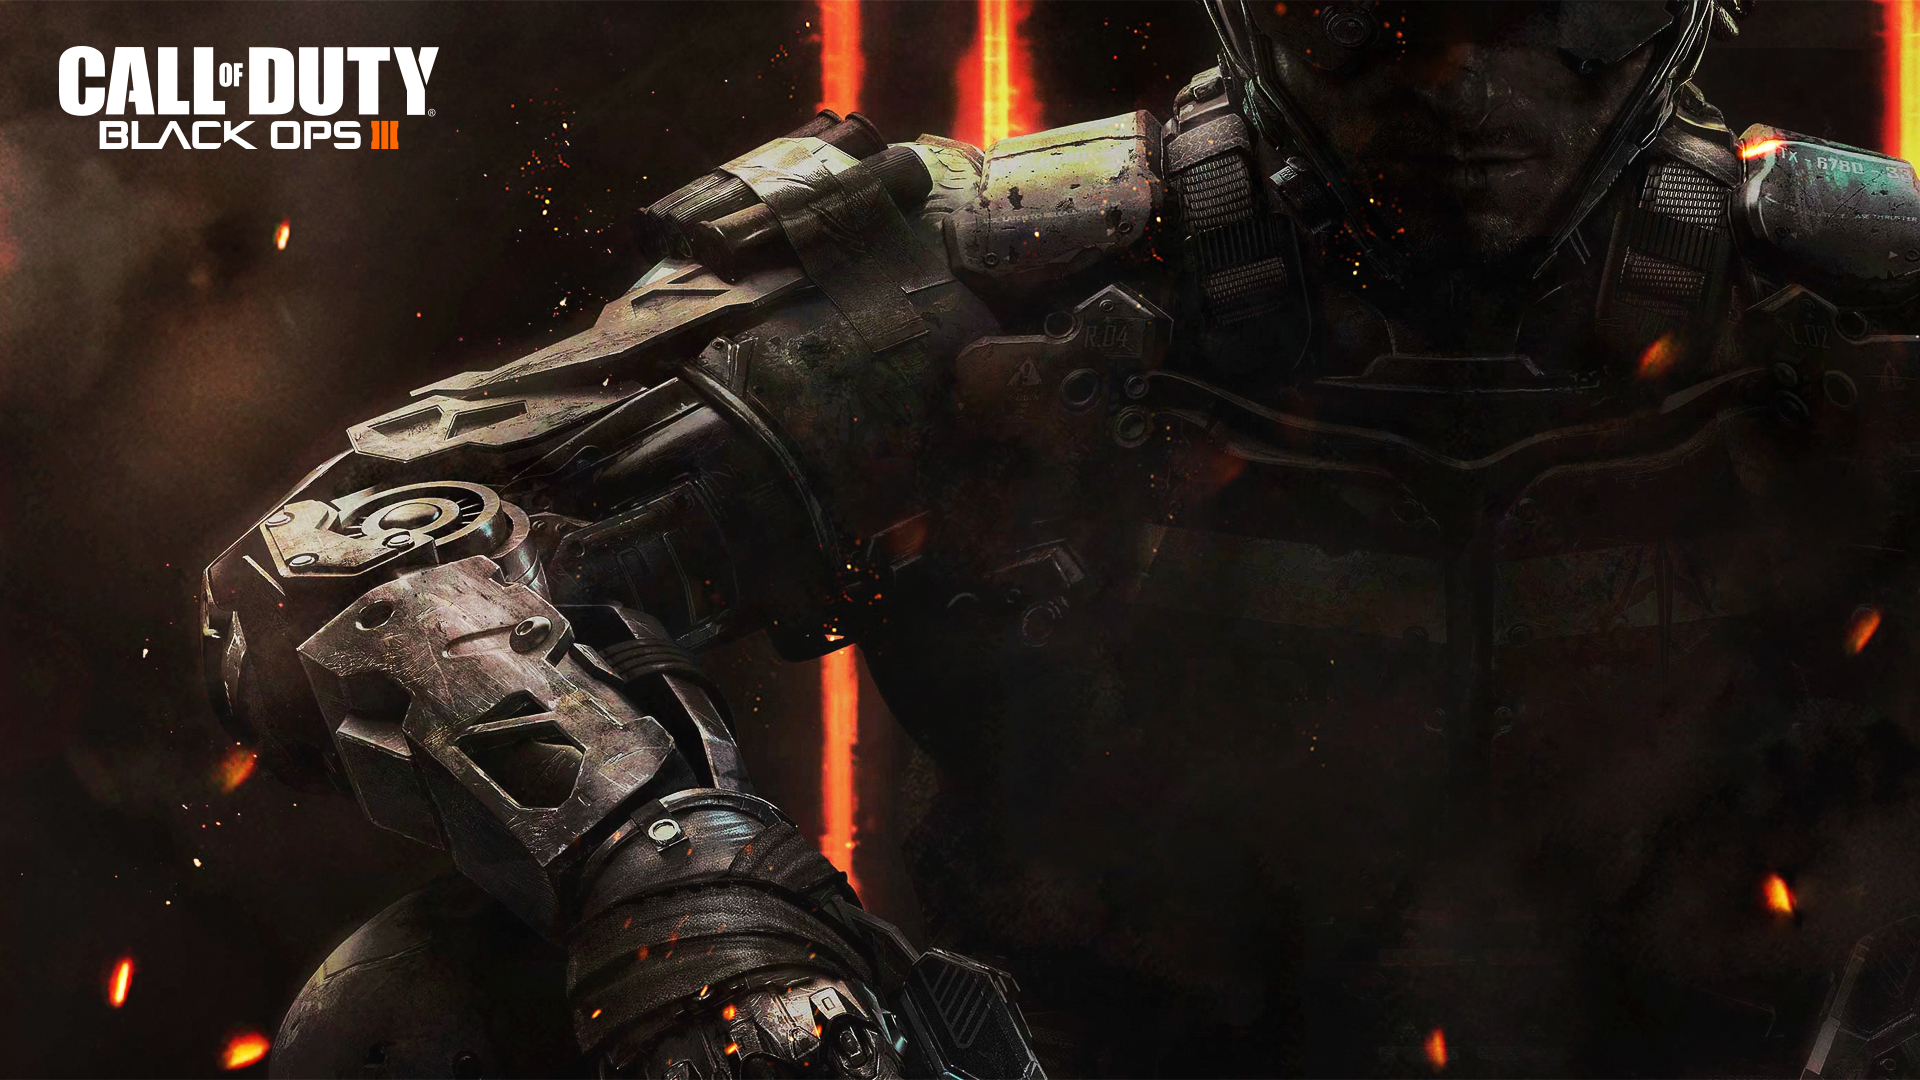 Free HD Black Ops 3 Zombie Wallpapers by unofficialcallofdutycom